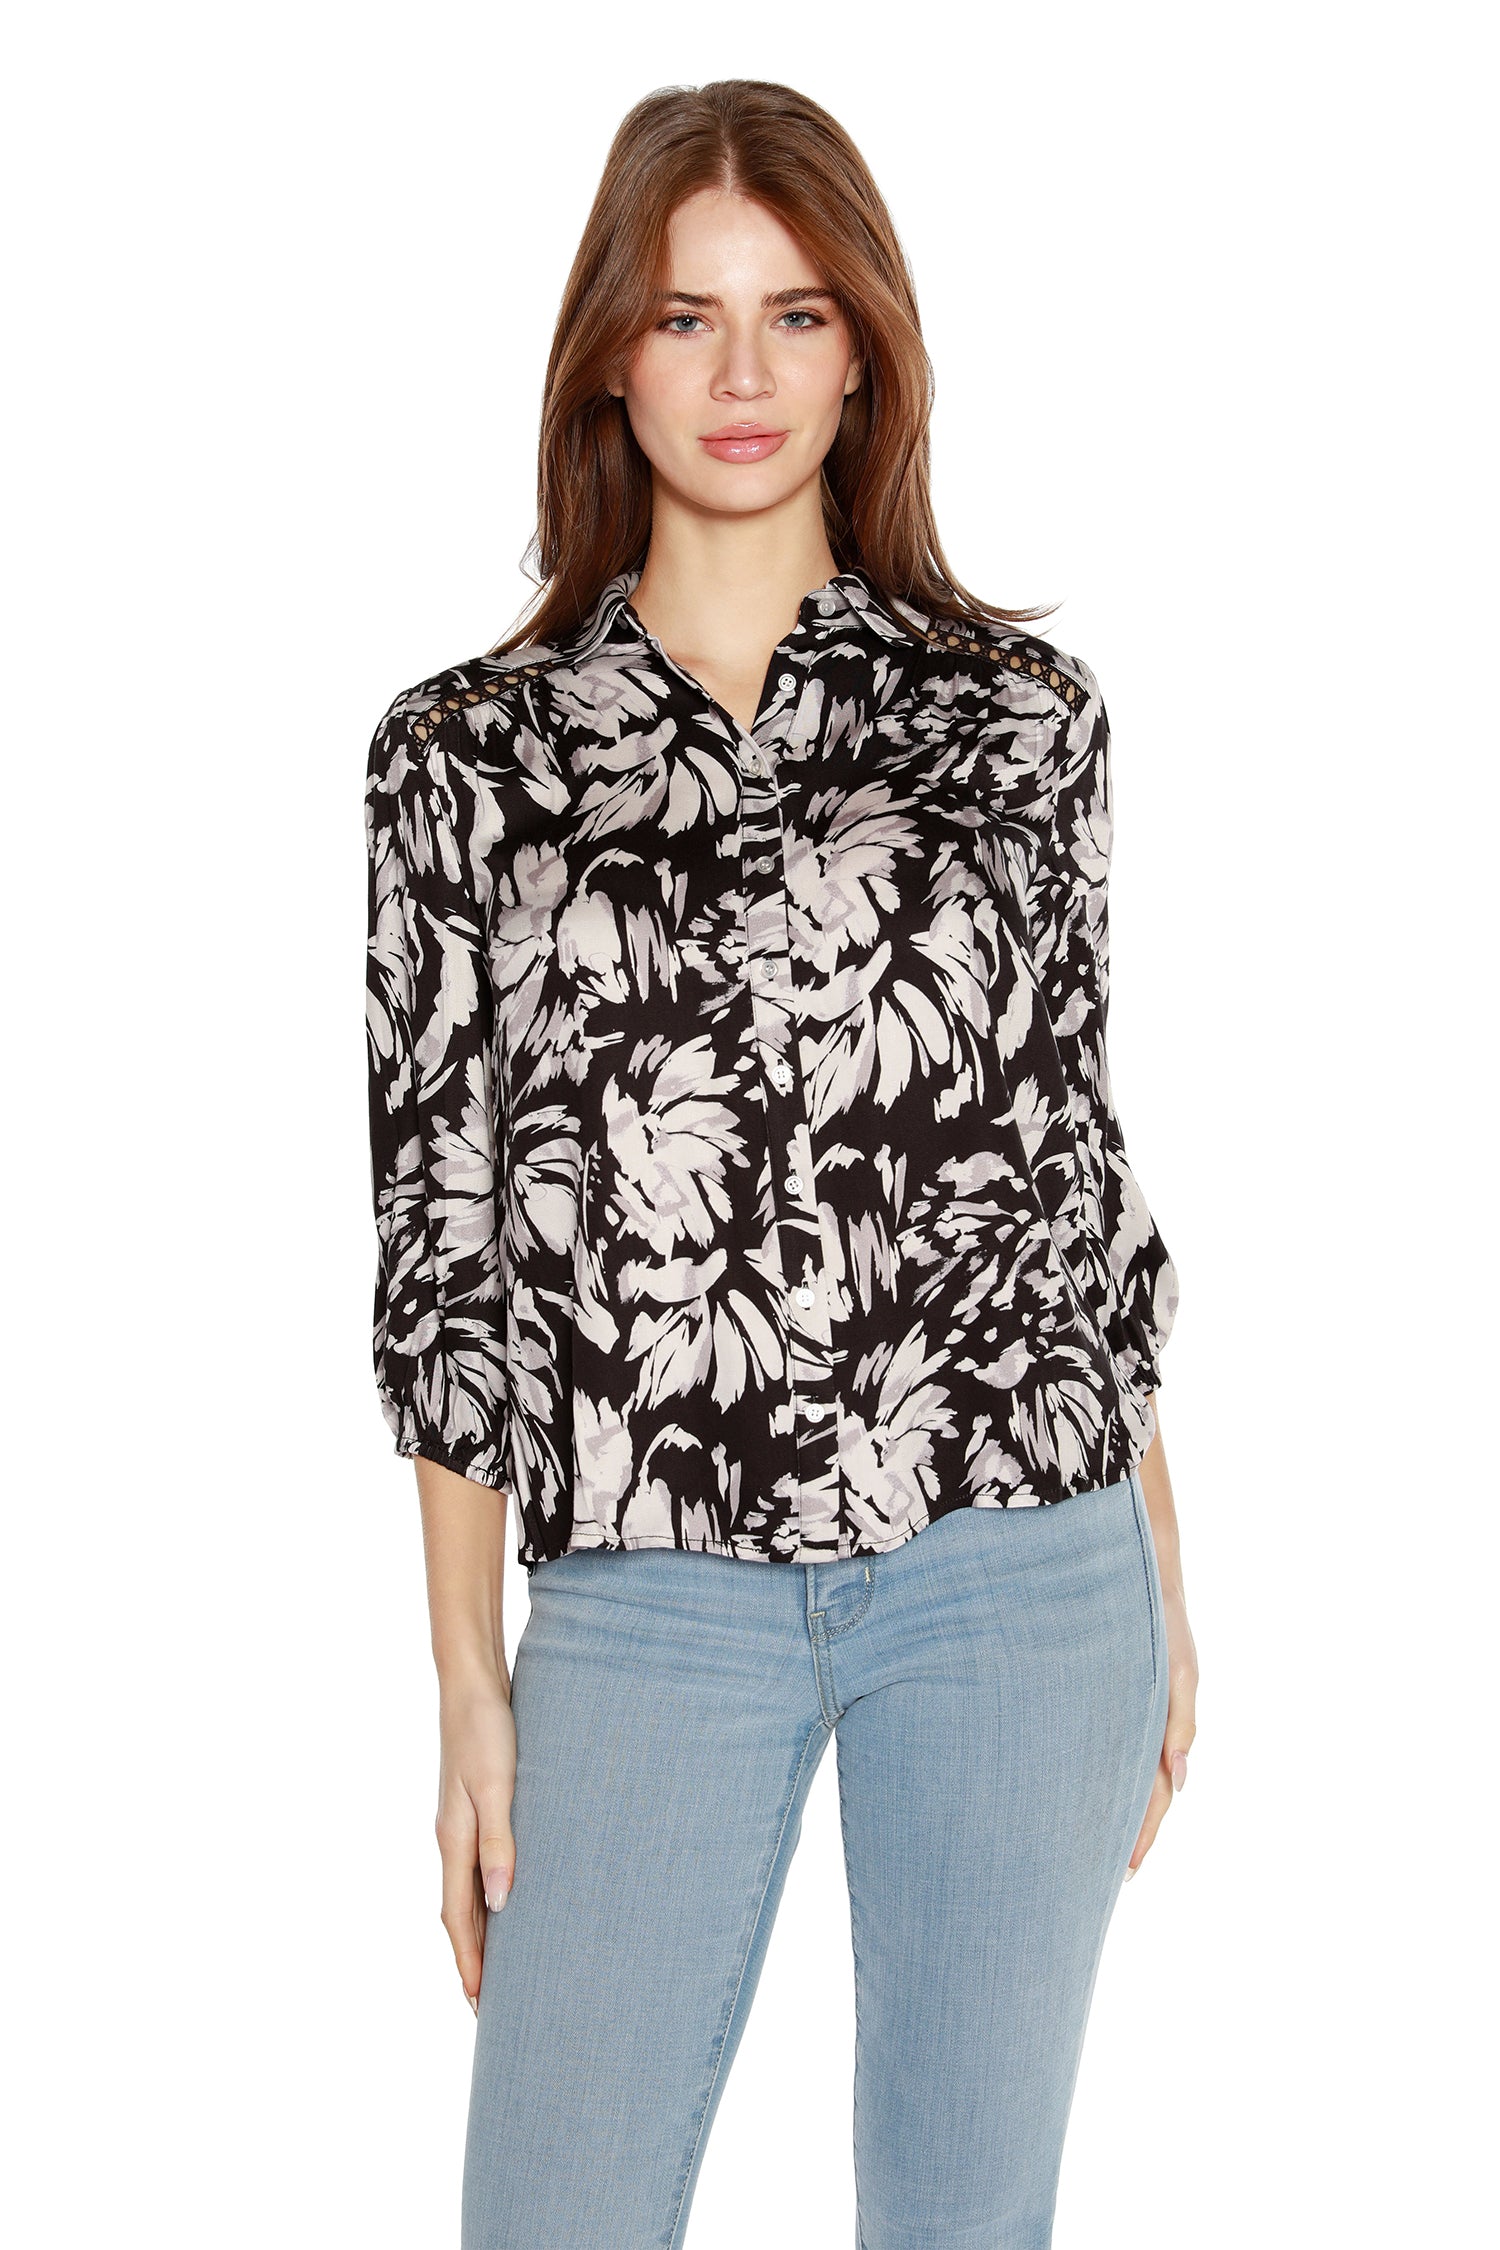 Women’s Floral Button Up Blouse with Collar and 3/4 Sleeves